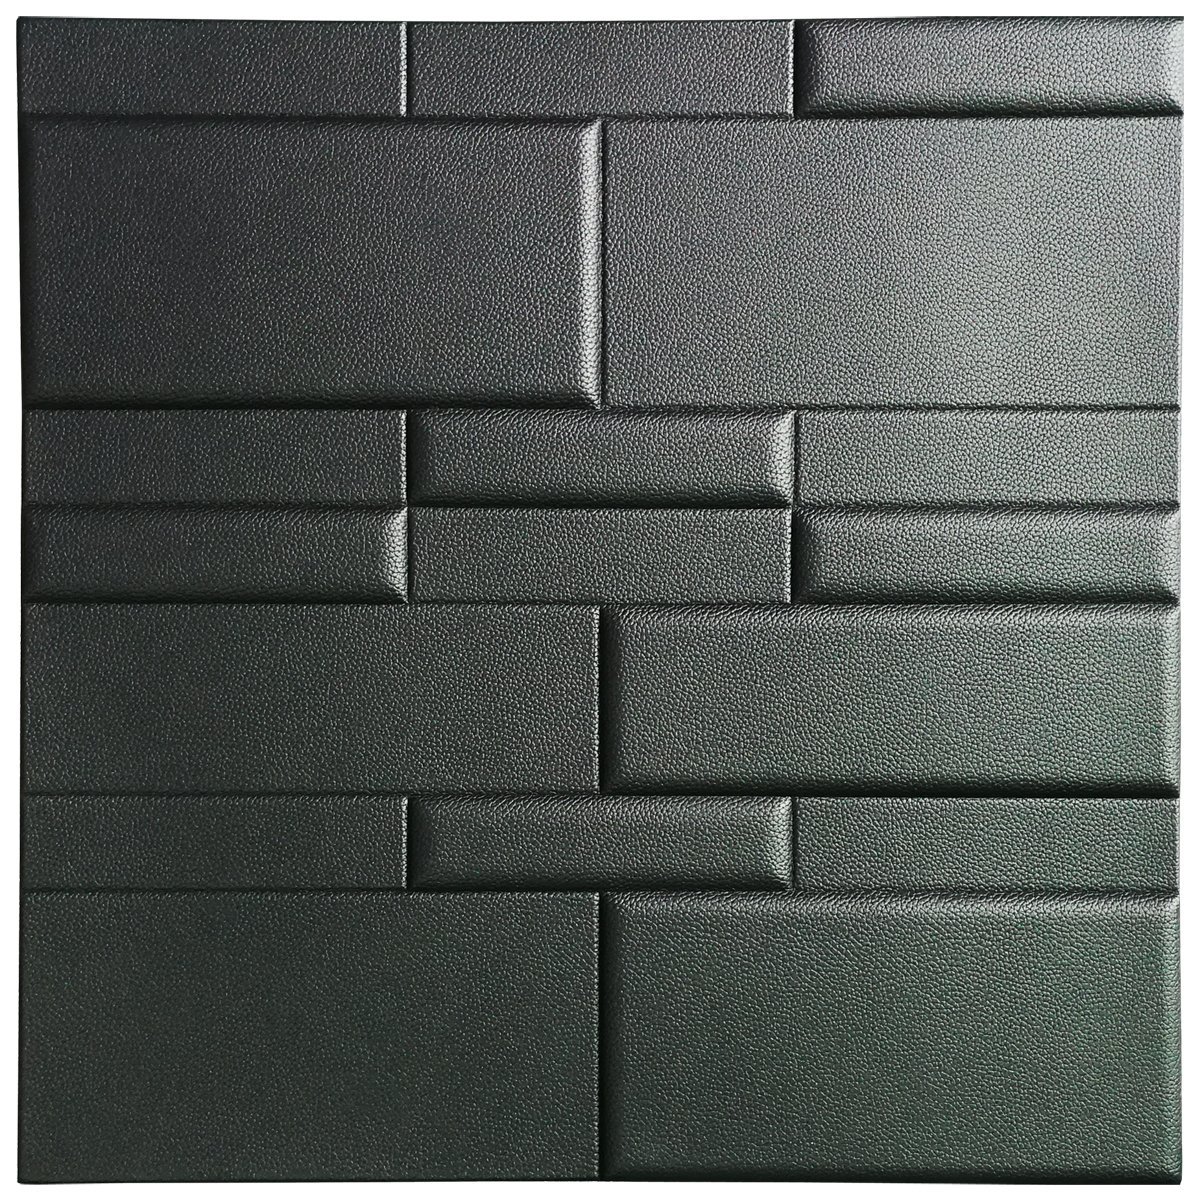 A12033 - Leather 3D Textured Wall Covering PU Material Panels Wave Wall 23.6x23.6 In (1 Piece)